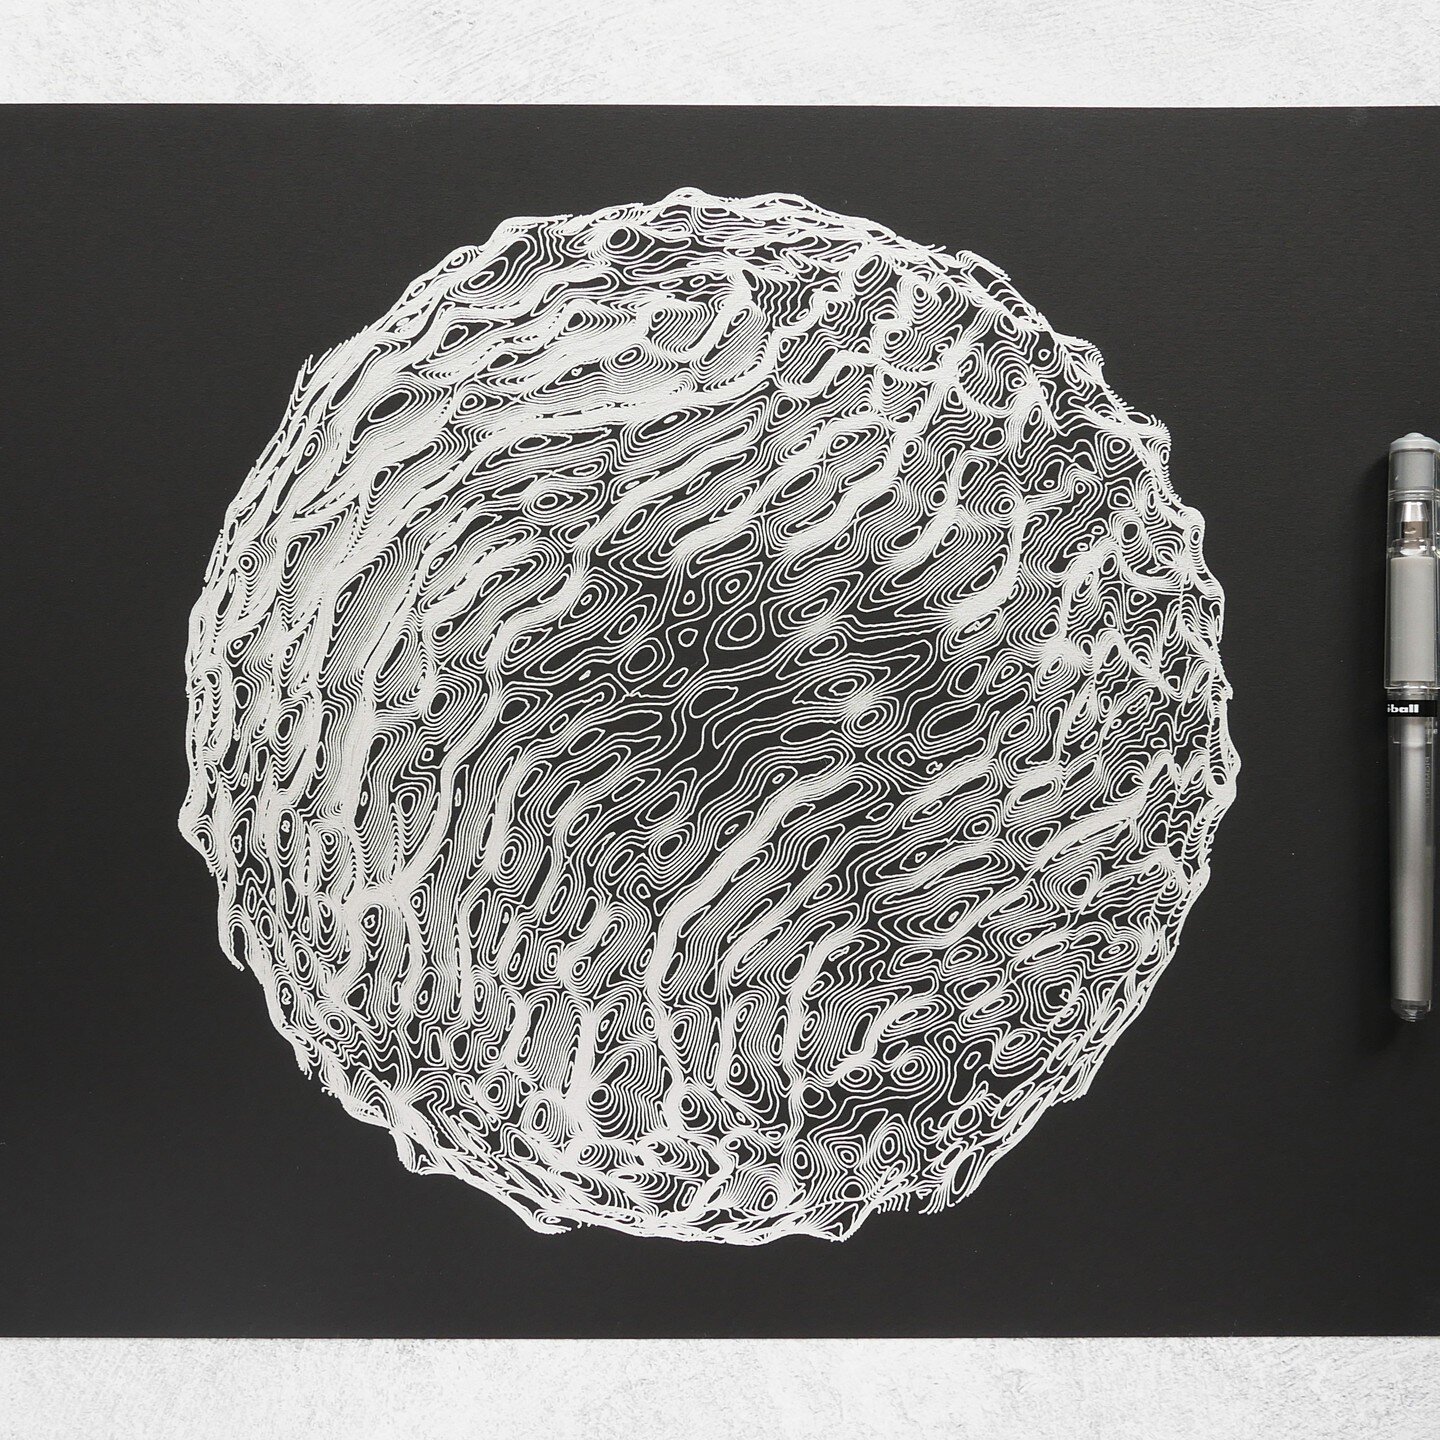 Developing a new technique for converting 3d models into Pen Plotter drawings. Trying to convey both the three-dimensional geometry but also a 'light' effect. Testing it on one of my more organic sculptures. Definitely has potential!
.
420 x 297mm
Si